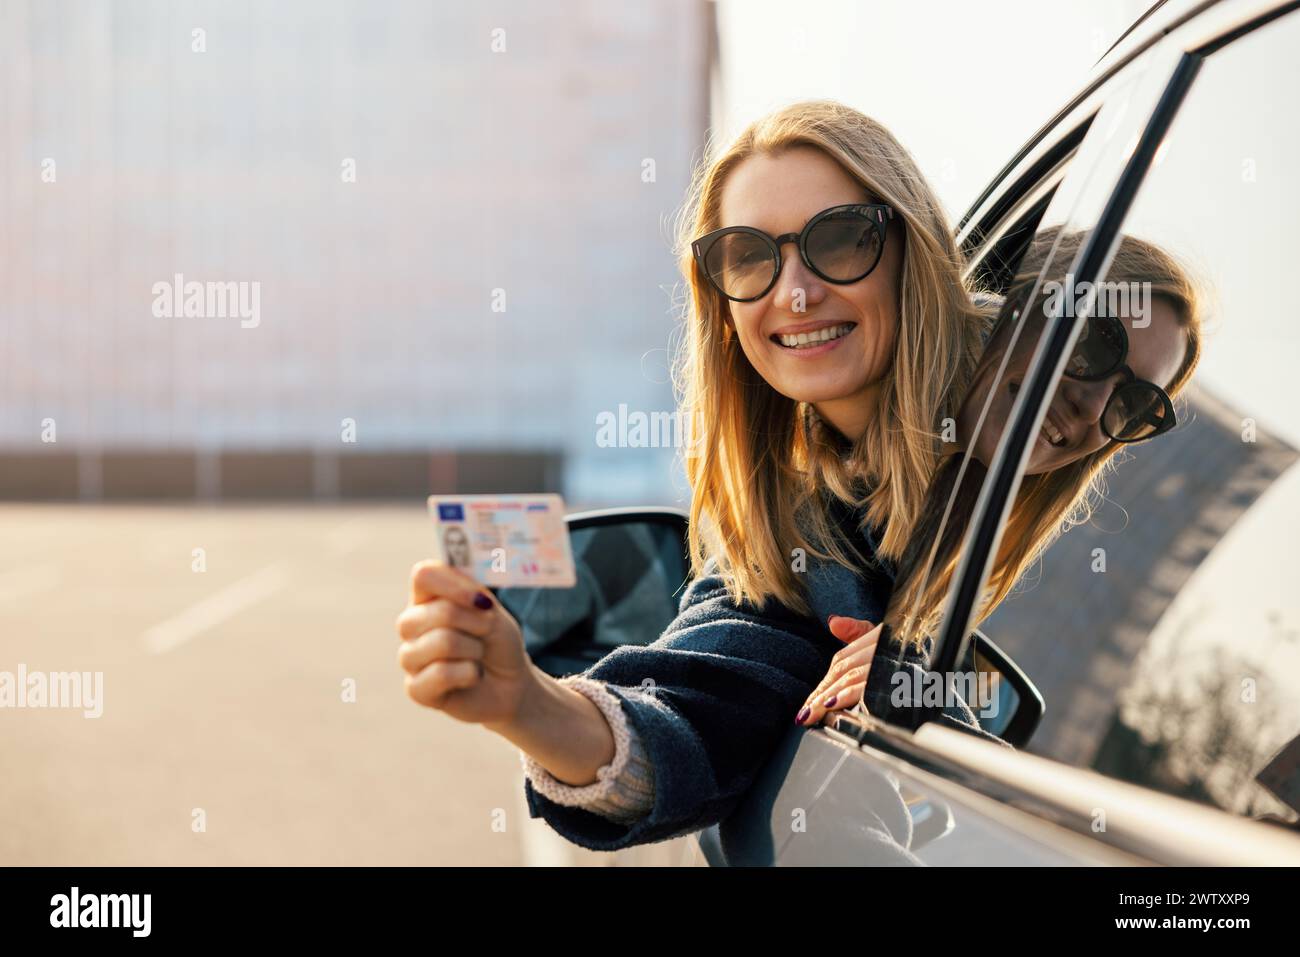 happy young woman showing her new driver license out of car window after successful test at driving school. copy space Stock Photo